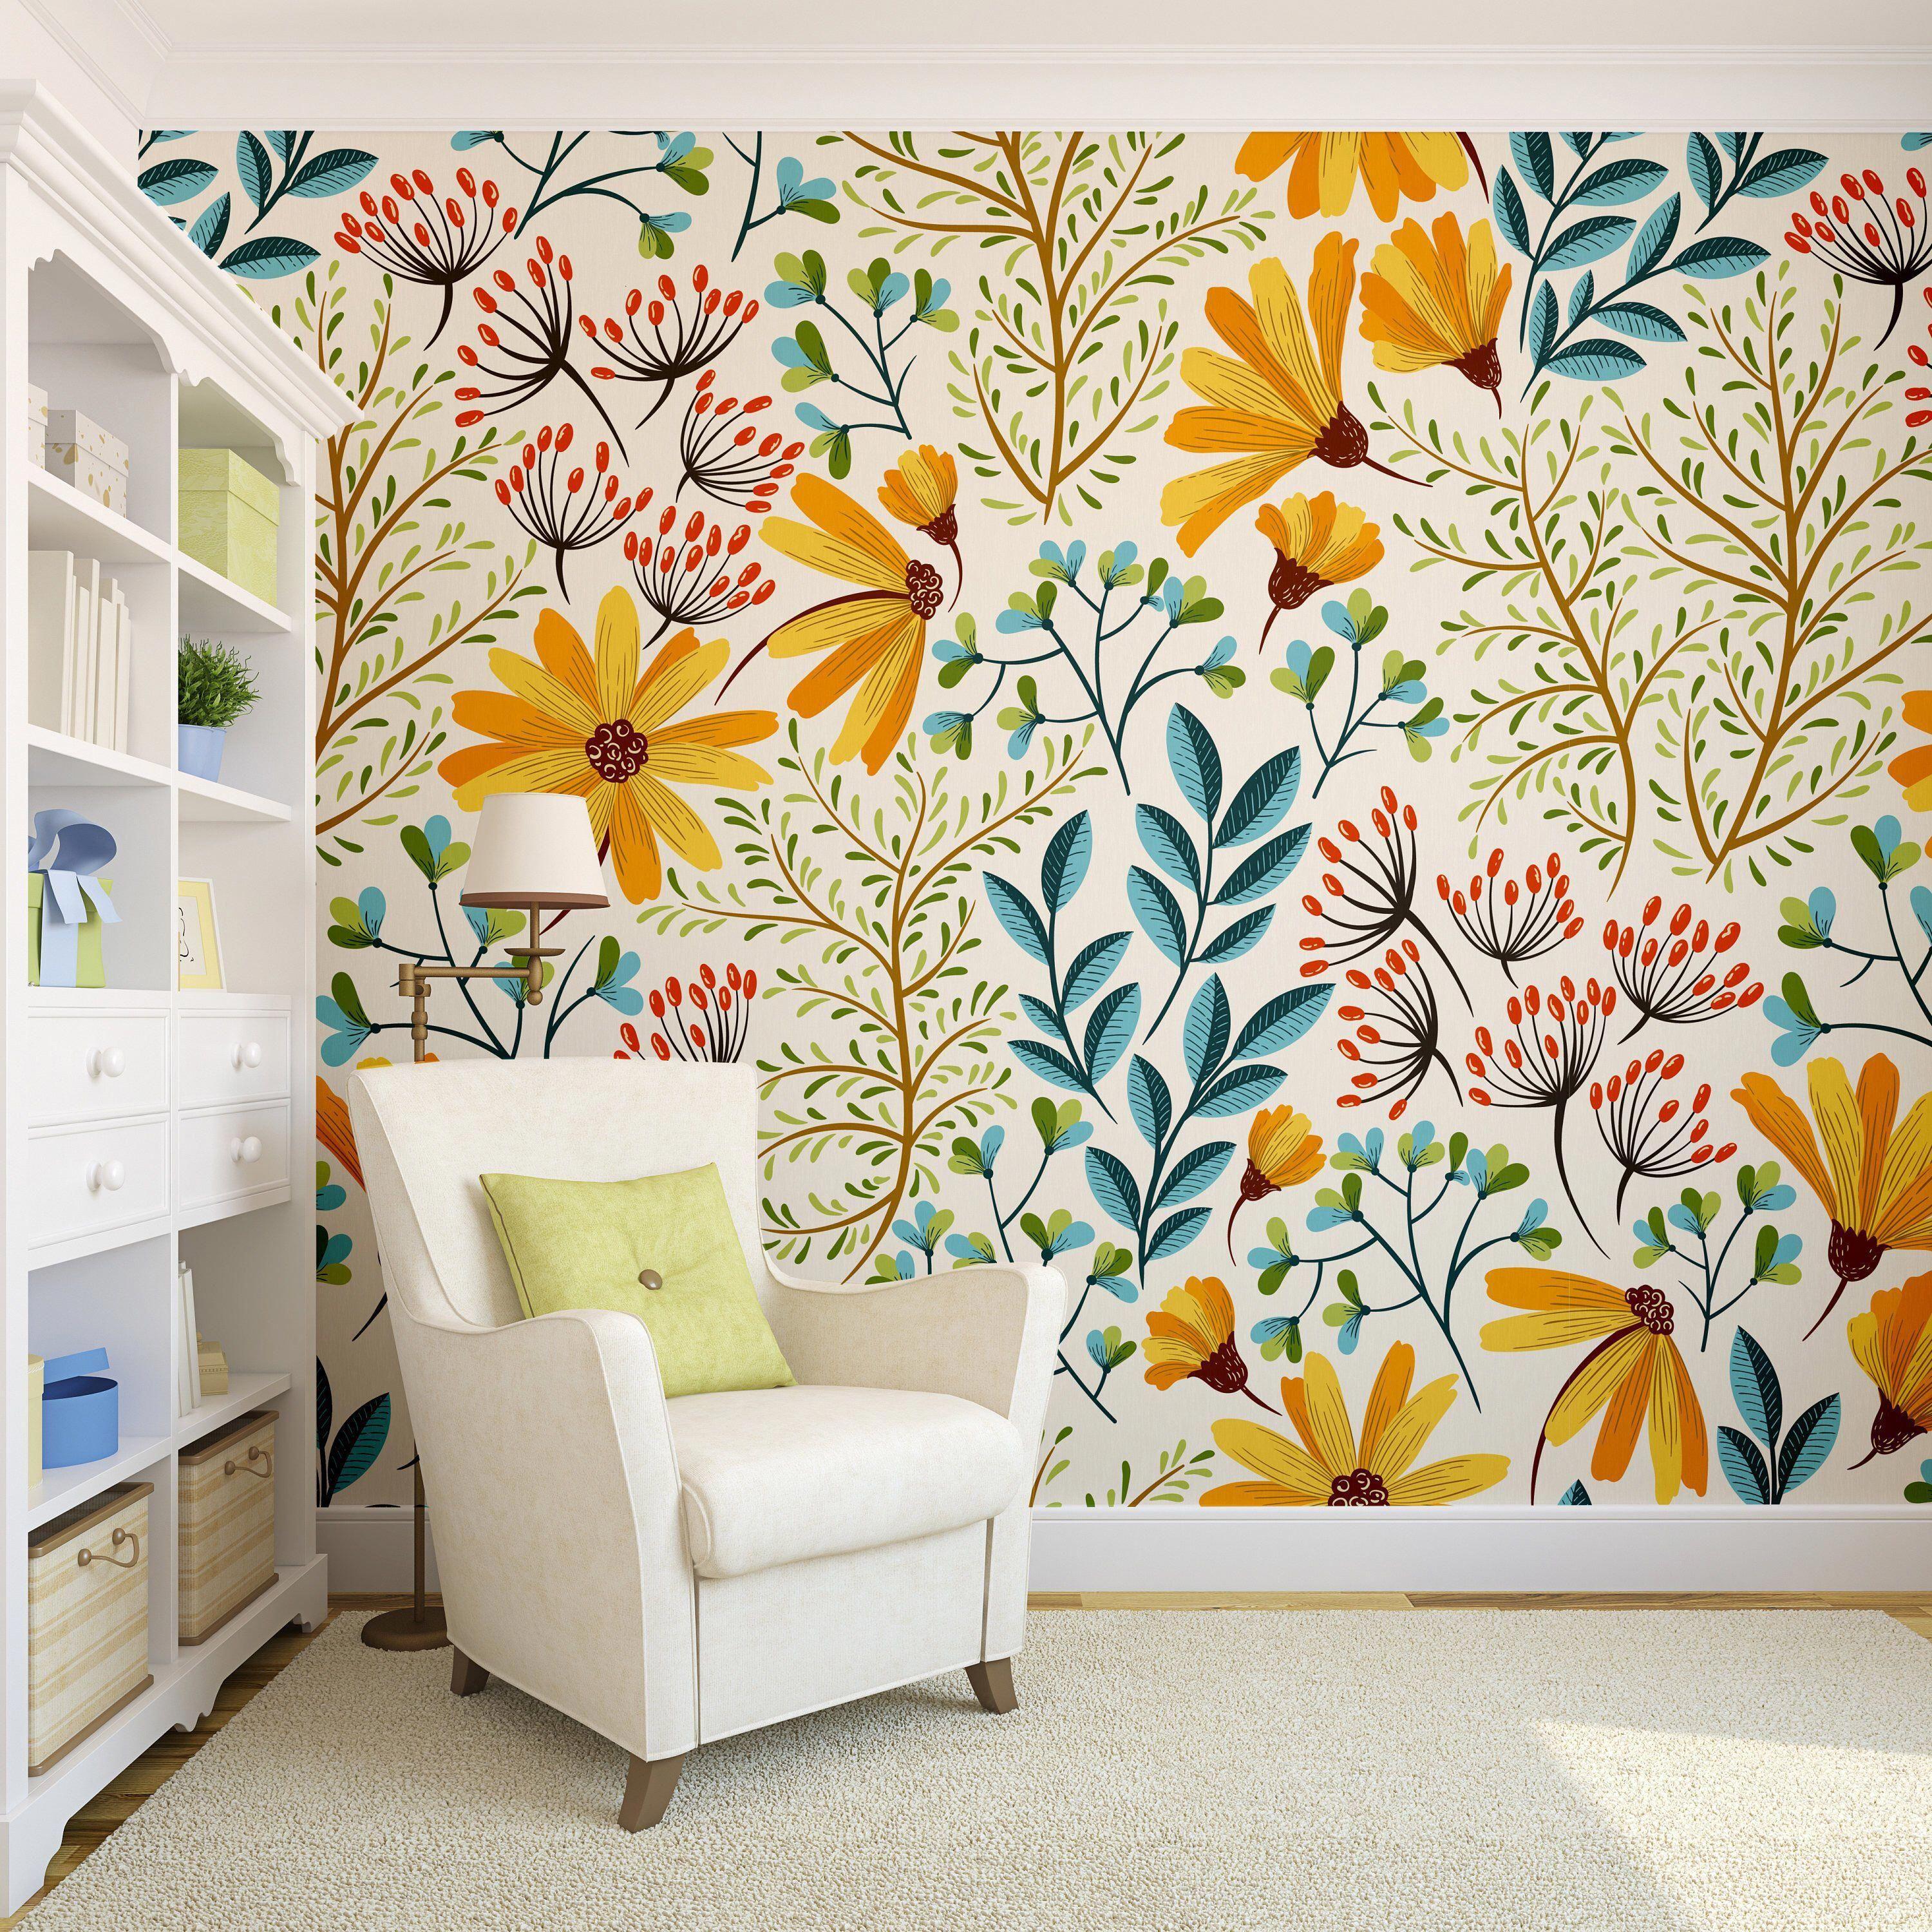 3000 x 3000 · jpeg - Removable Wallpaper Colorful Floral | Wallpaper, Self Adhesive ...